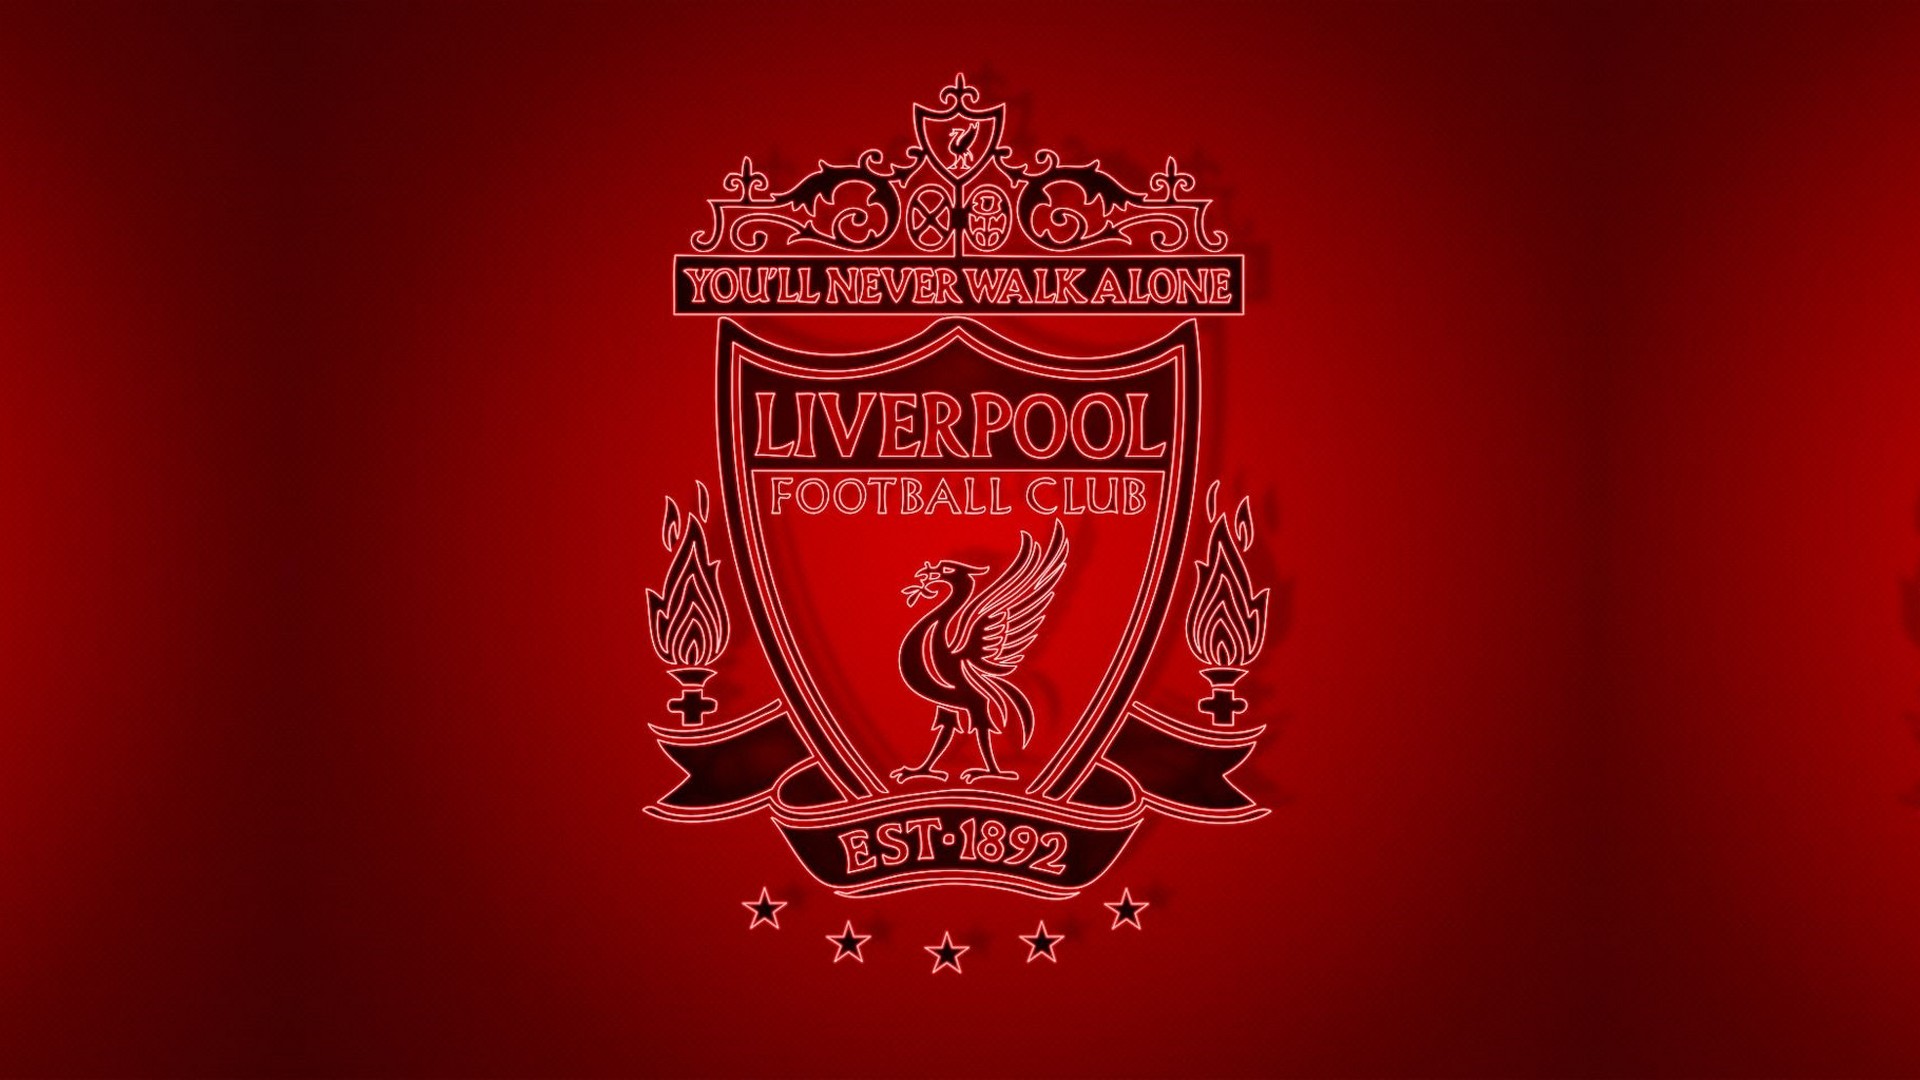 HD Backgrounds Liverpool with resolution 1920x1080 pixel. You can make this wallpaper for your Mac or Windows Desktop Background, iPhone, Android or Tablet and another Smartphone device